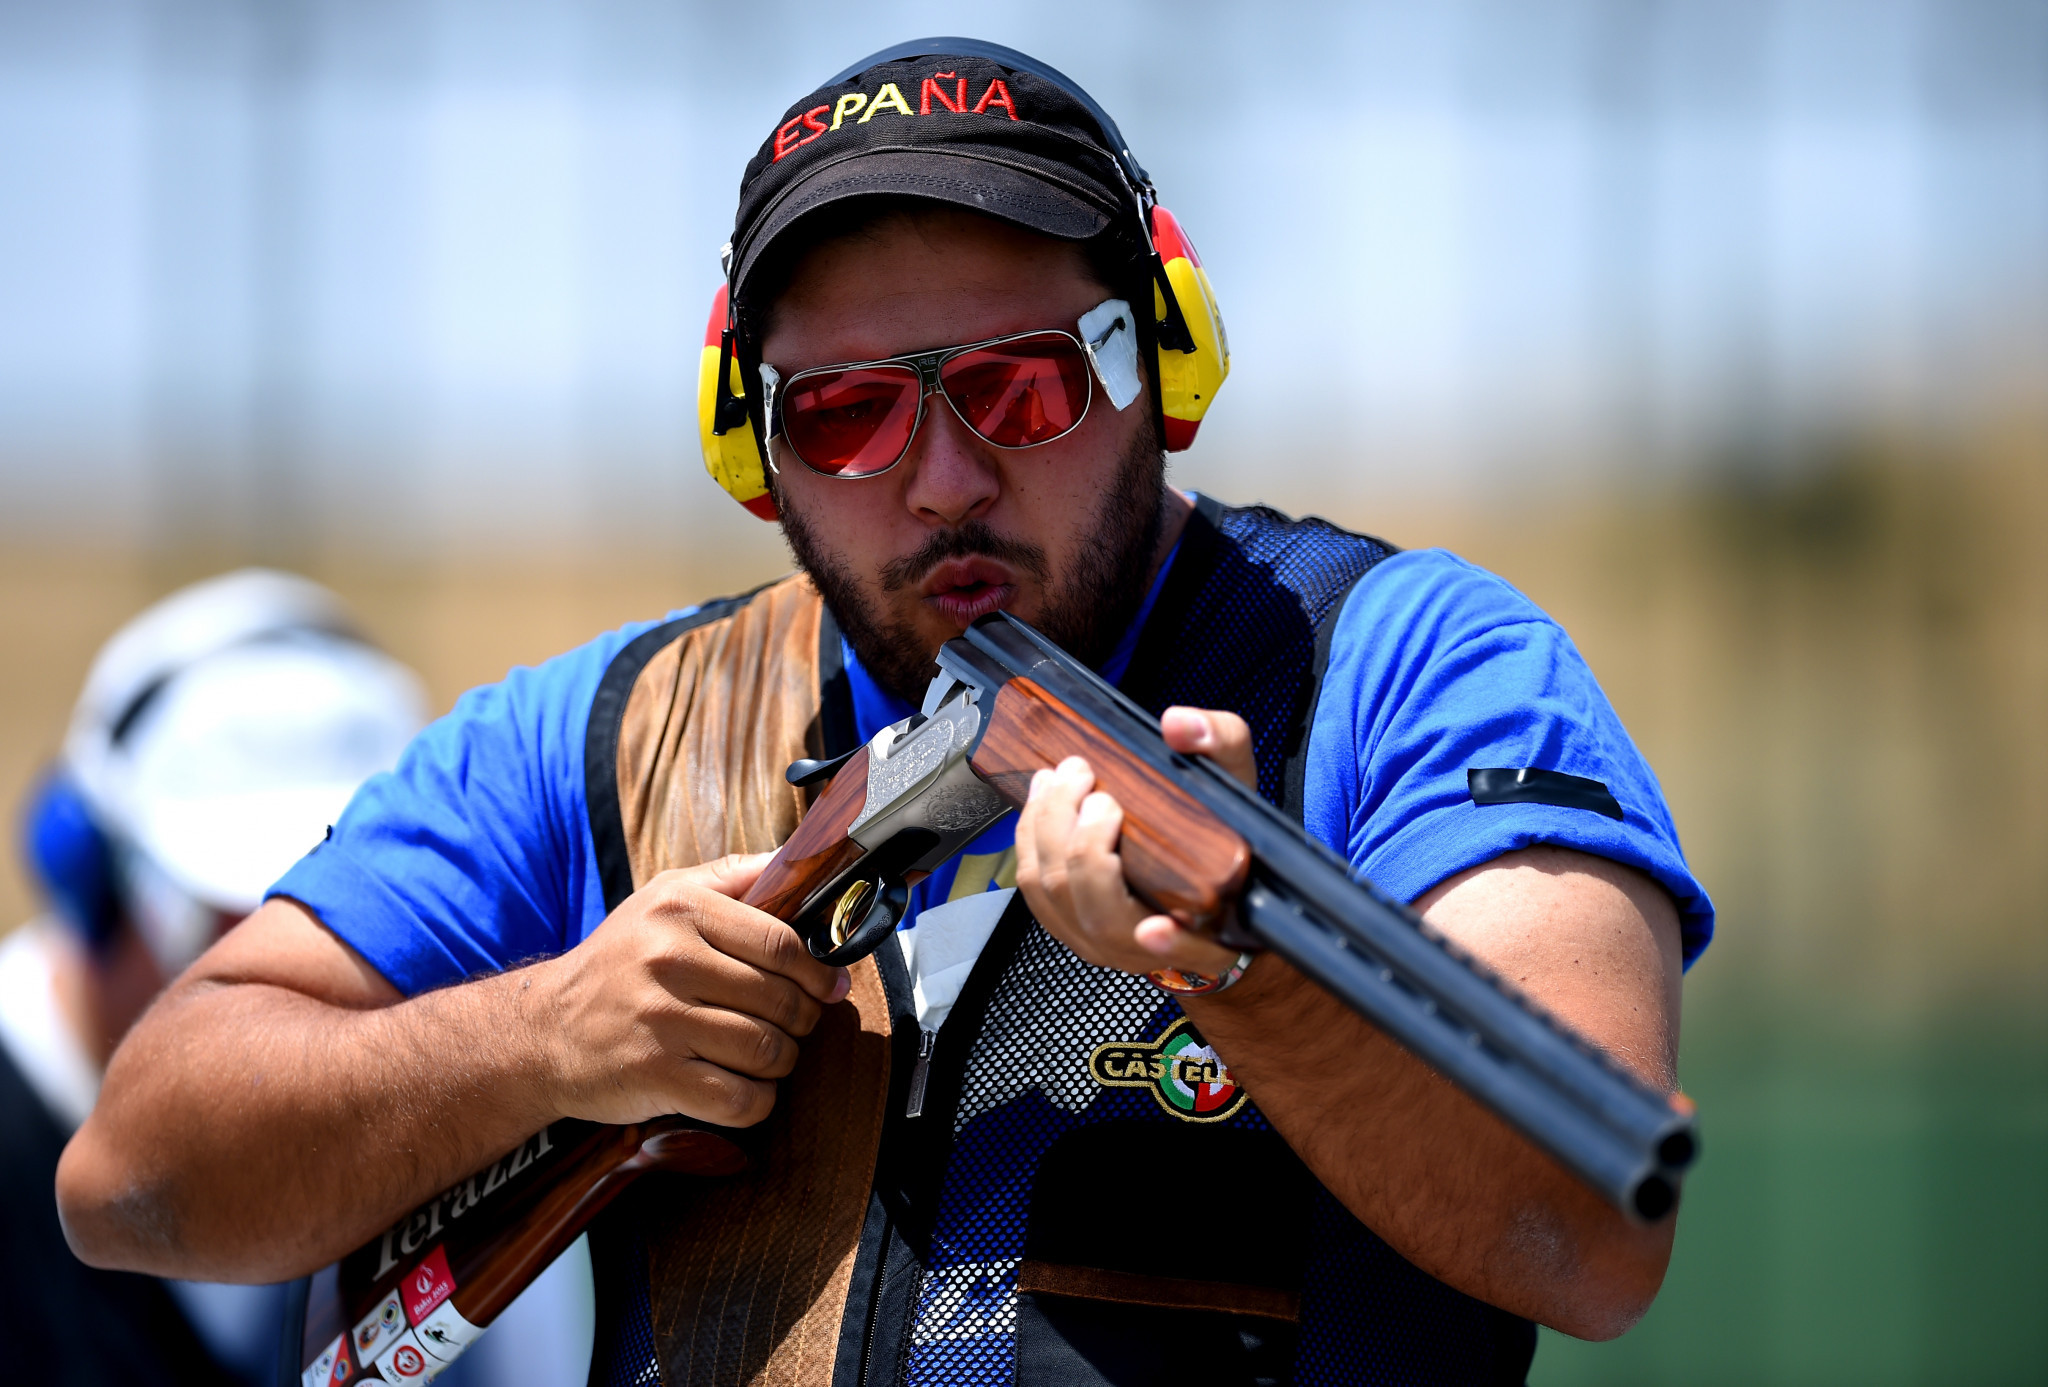 Olympic gold medallist Alberto Fernández of Spain was a winner at the ISSF Shotgun World Cup in Lima ©Getty Images 